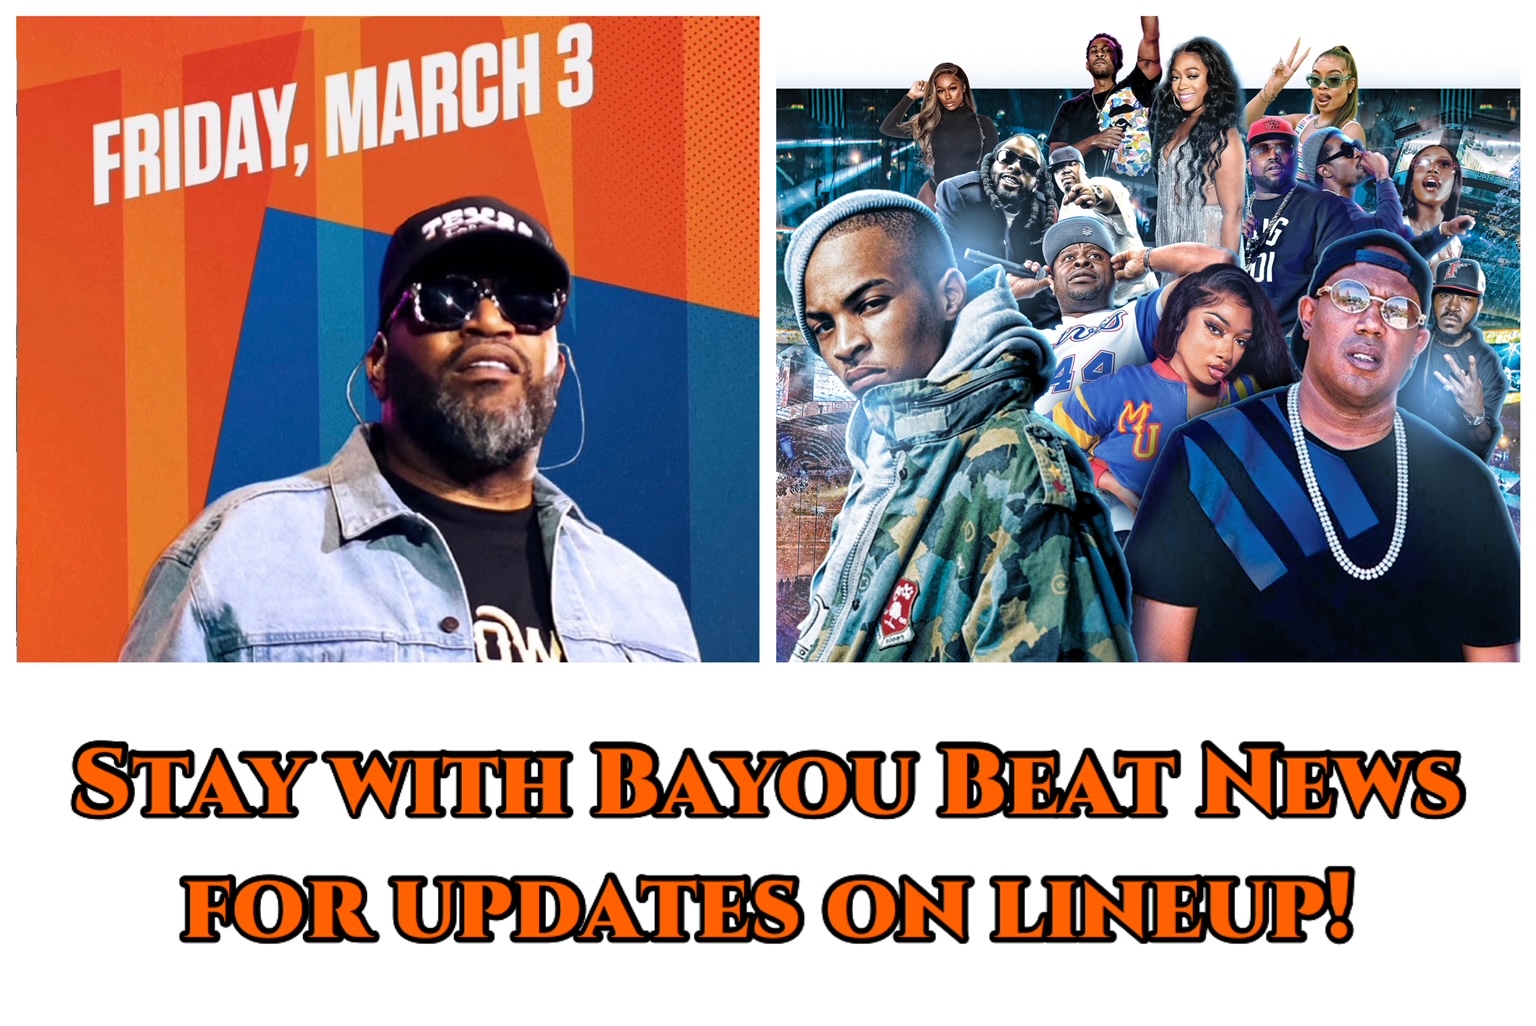 'Don't Flex, Baby!' 8 Ball & MJG added to Bun B's Southern Takeover at